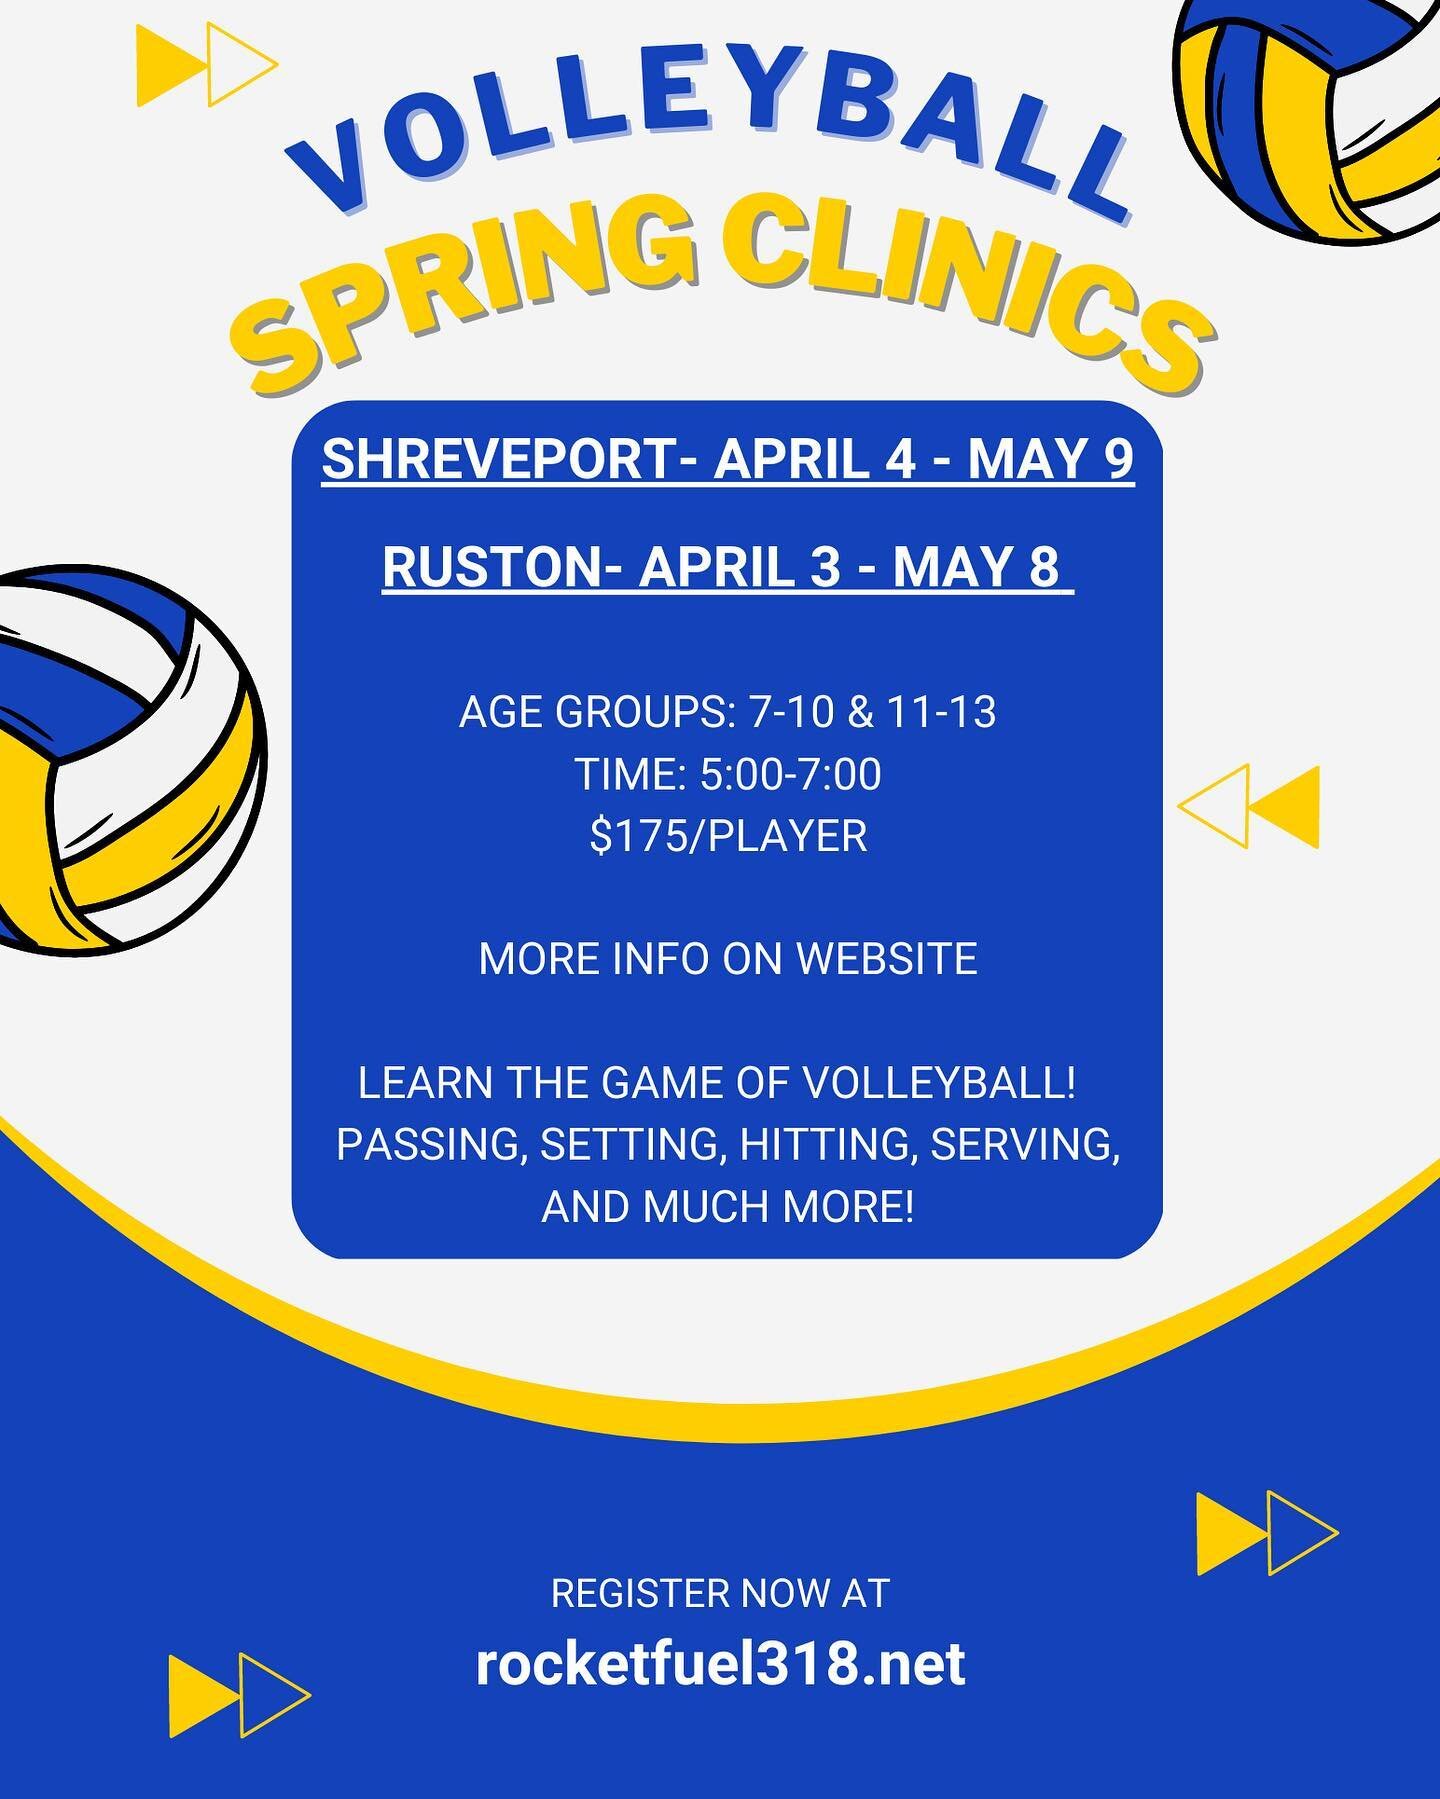 Our Ruston Spring Clinic started today from 5-7pm! 
Our Shreveport Spring Clinic starts tomorrow from 5-7pm! 
Registration is still open, click the link below! ❤🏐
https://www.rocketfuel318.net/camps-and-clinics